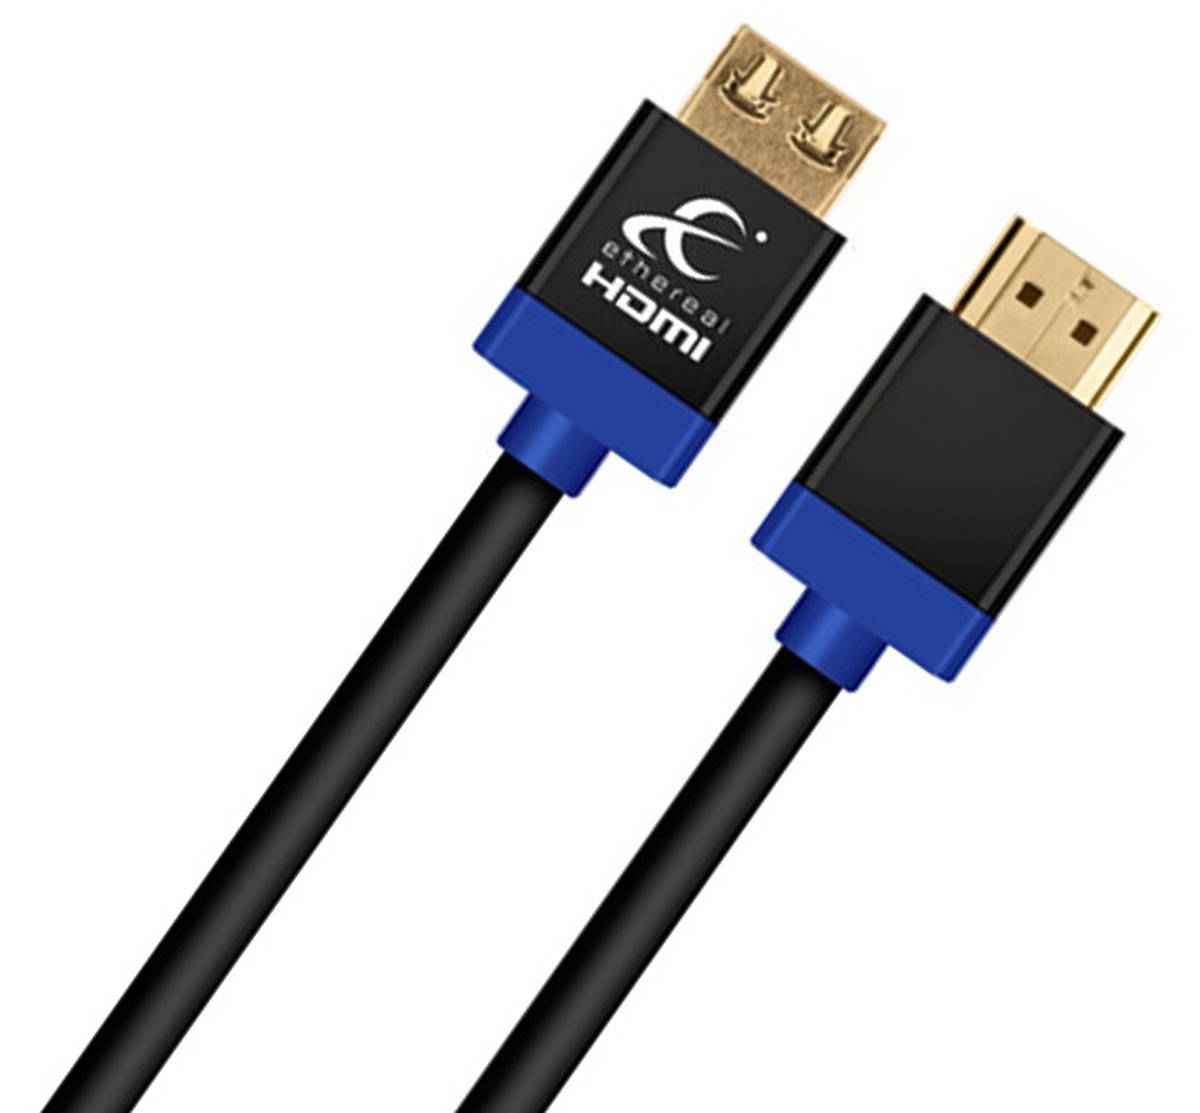 MHY-LHDMER8 8.00m Metra Ethereal MHY HDMI cable product image. Click to enlarge.